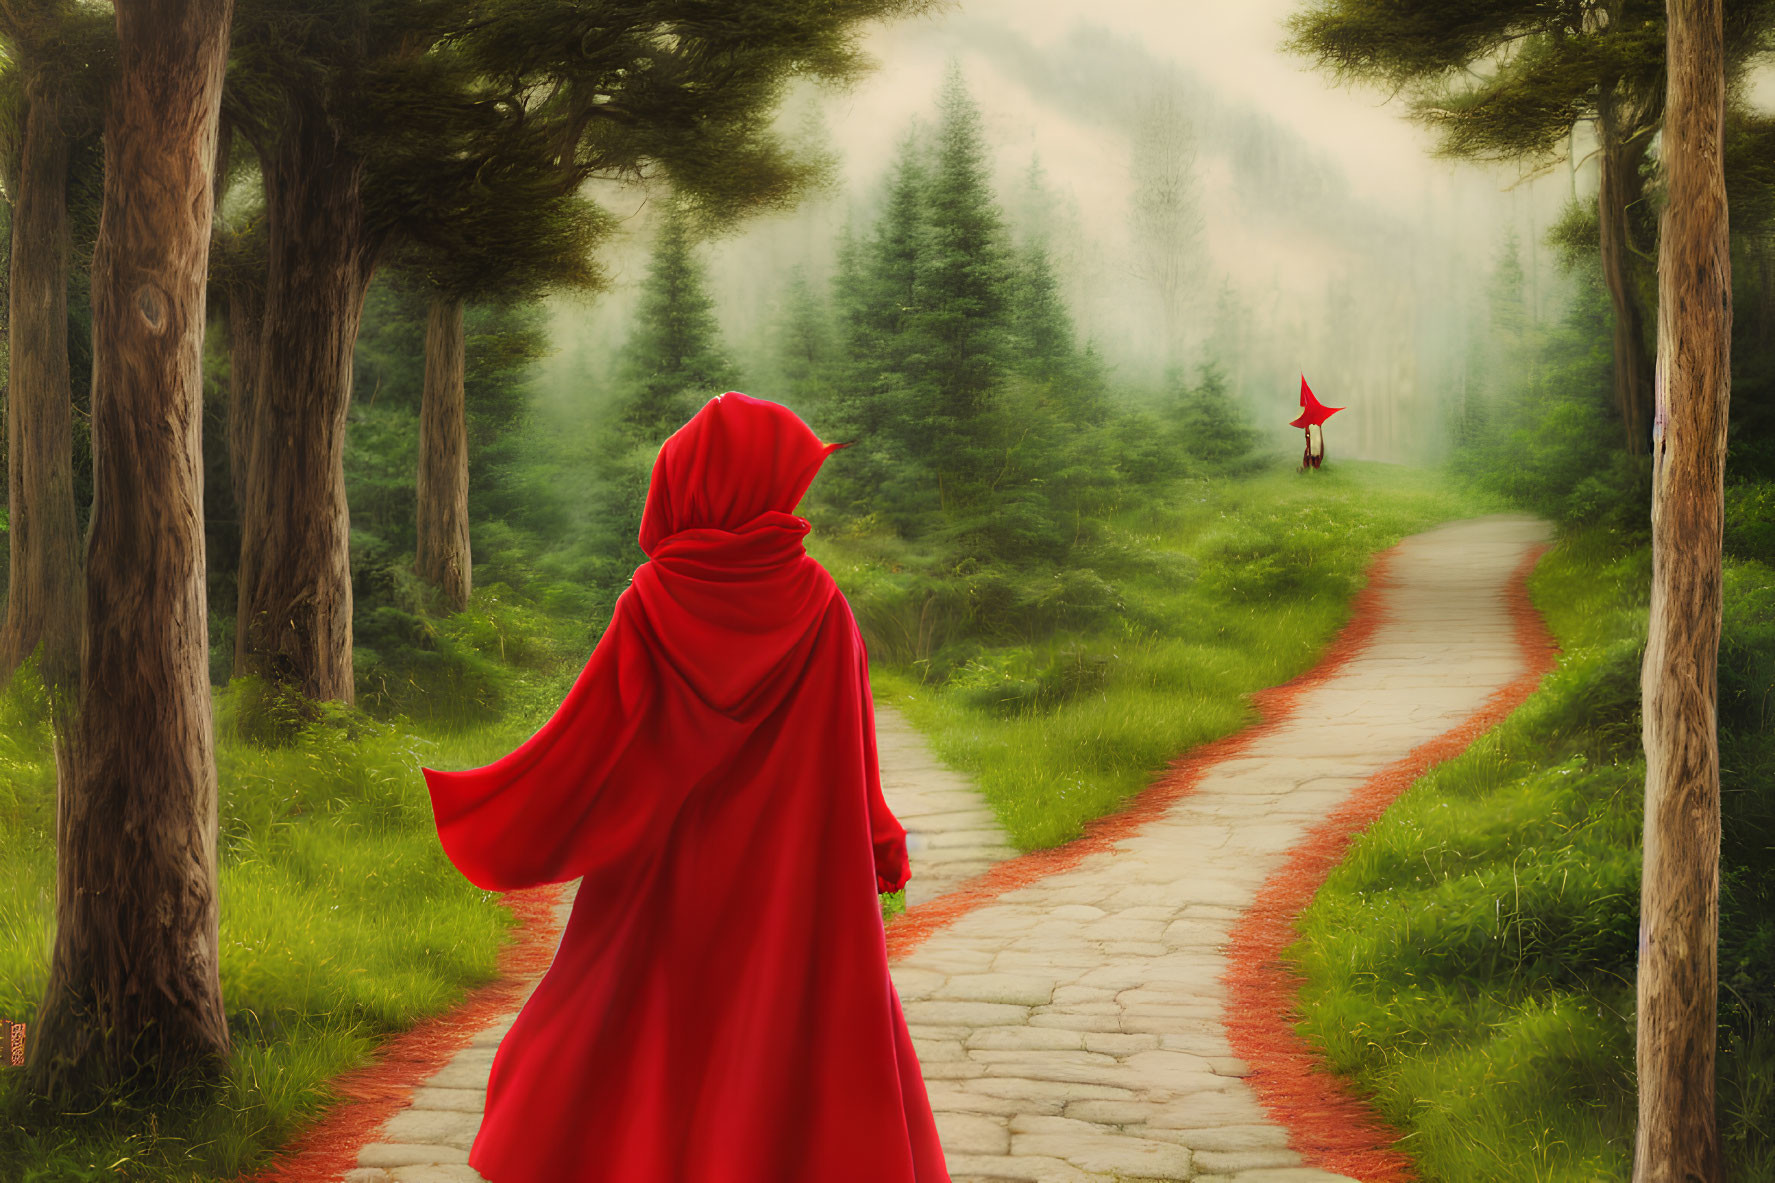 Two figures in red cloaks at forest fork under misty sky